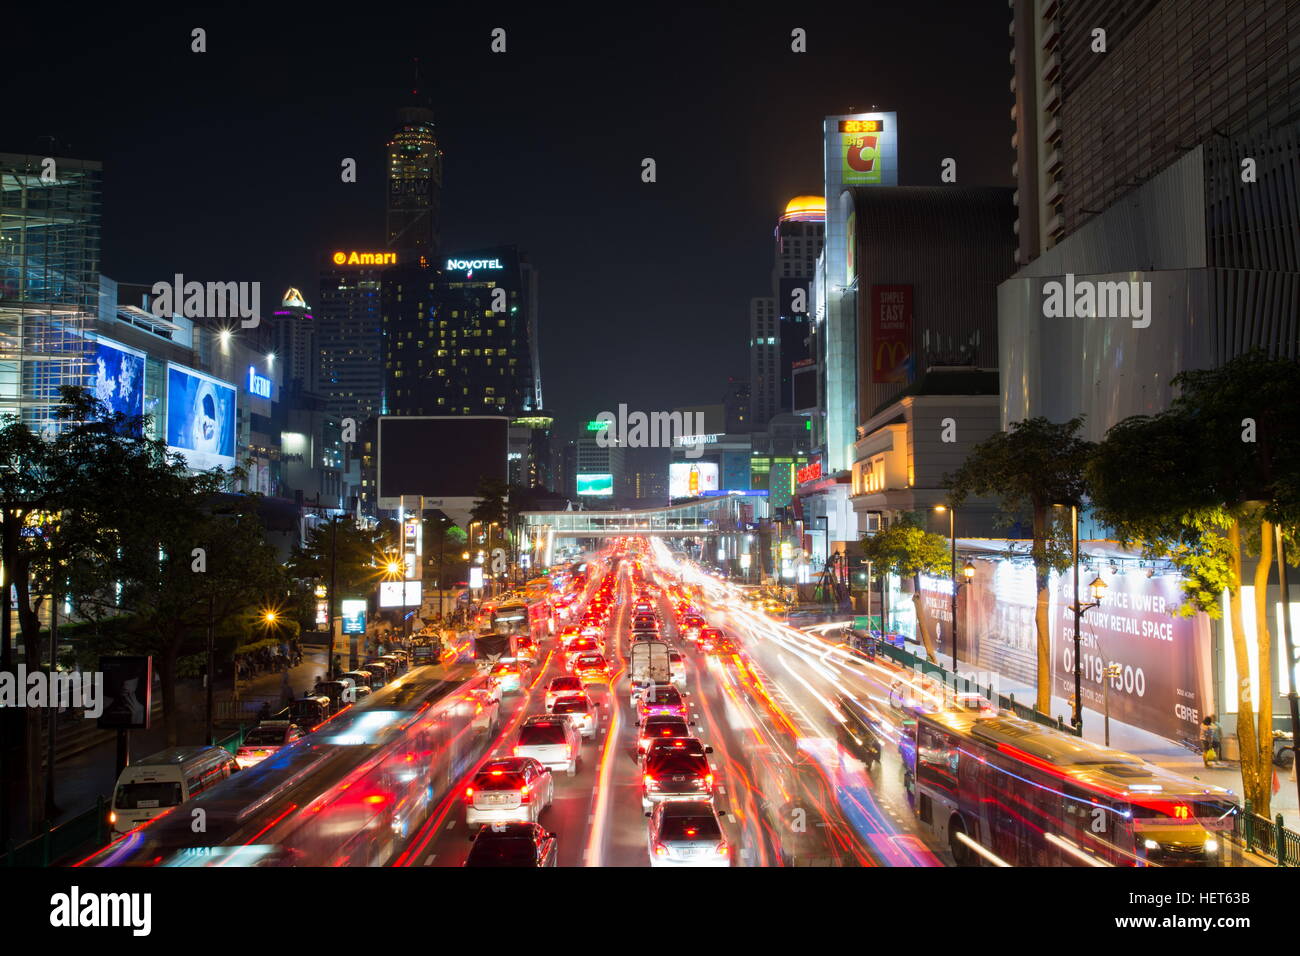 BANGKOK, THAILAND - OCTOBER 13, 2016: View at the Siam square night traffic with light trails. This square is famous shopping area in Bangkok Stock Photo